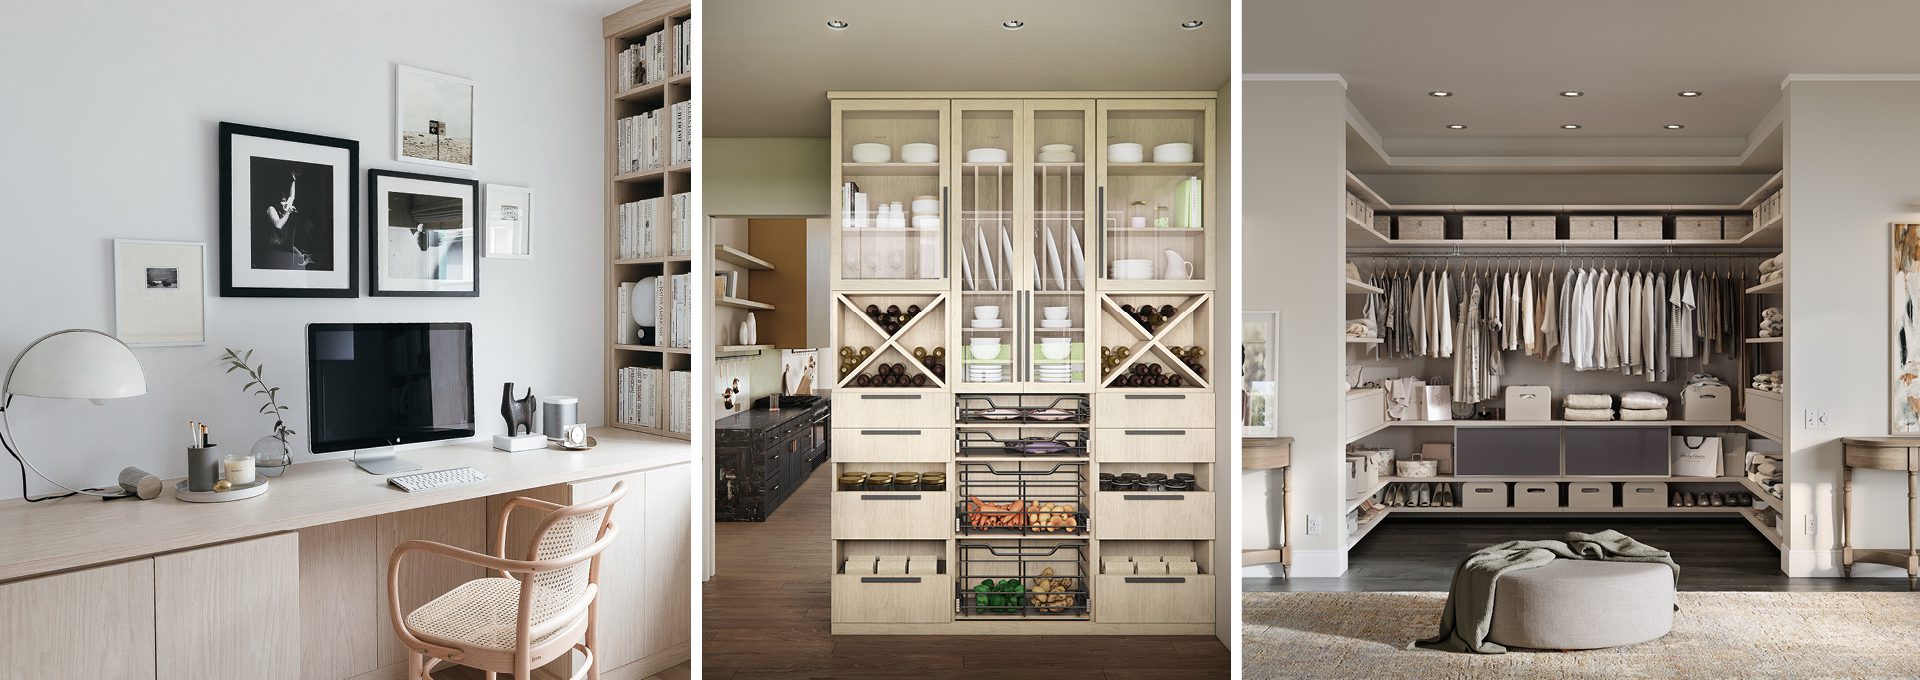 Enjoy the California Closets Spring Promotion Event with up to $2,500 savings for new walk in closet, media center, or kitchen pantry in St. Louis.